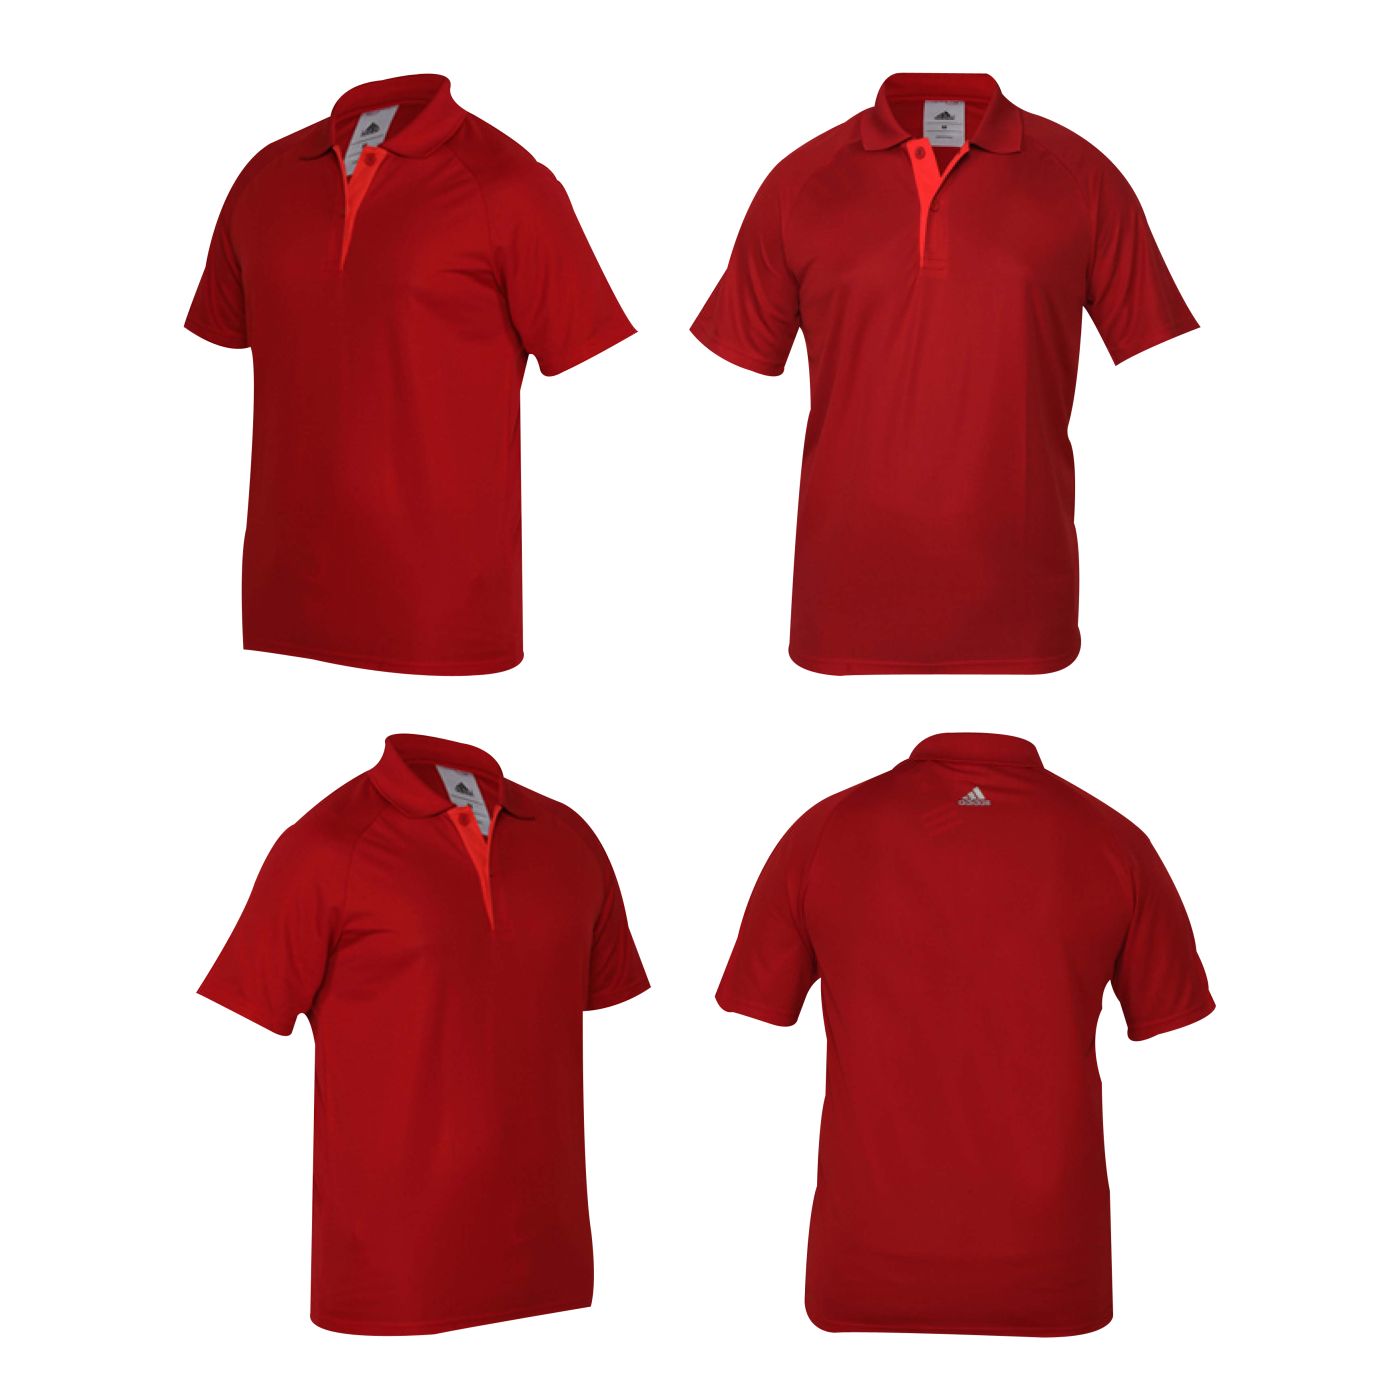 Adidas Dry Fit Red T Shirt